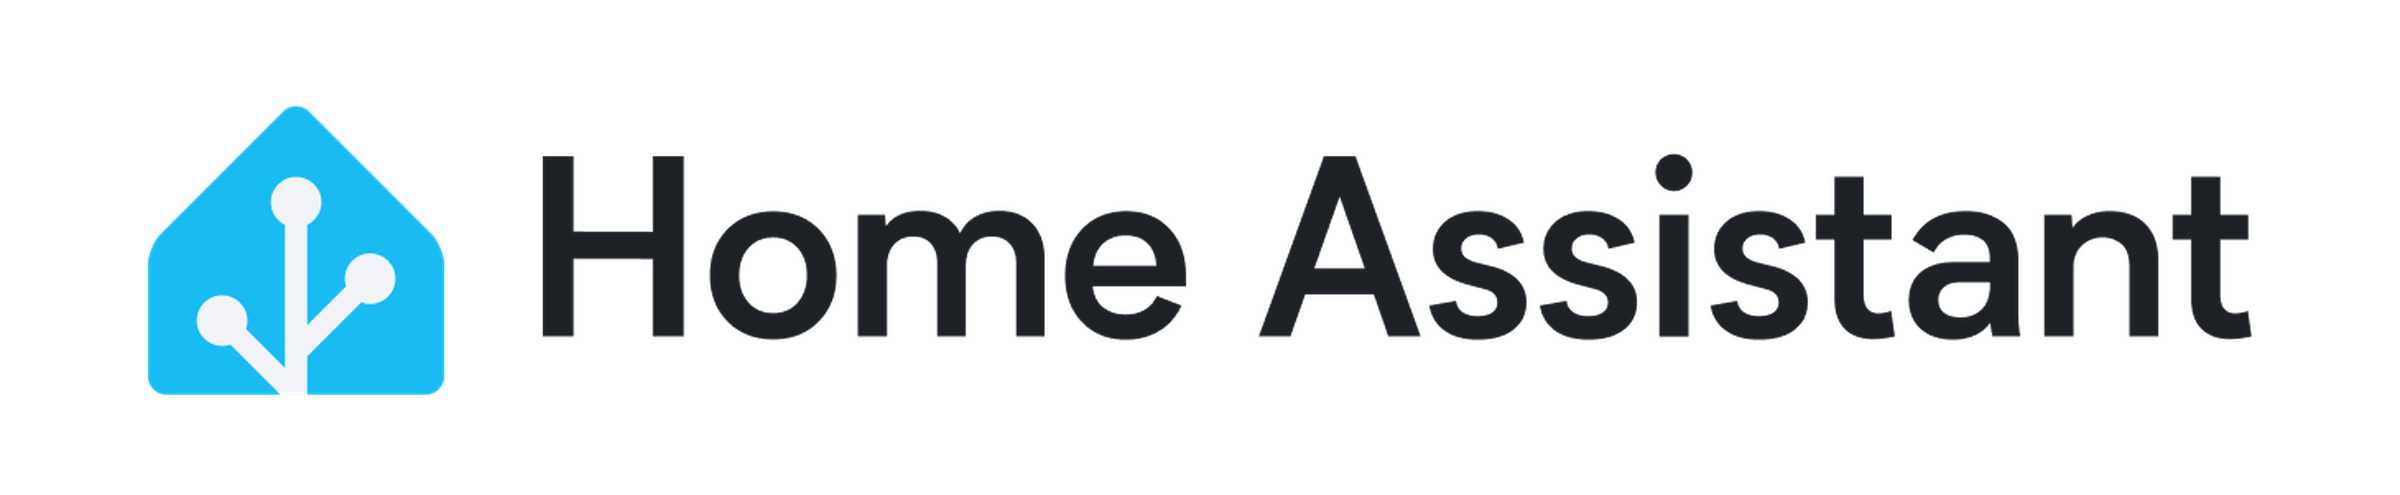 The newest Home Assistant logo, redesigned for its birthday.